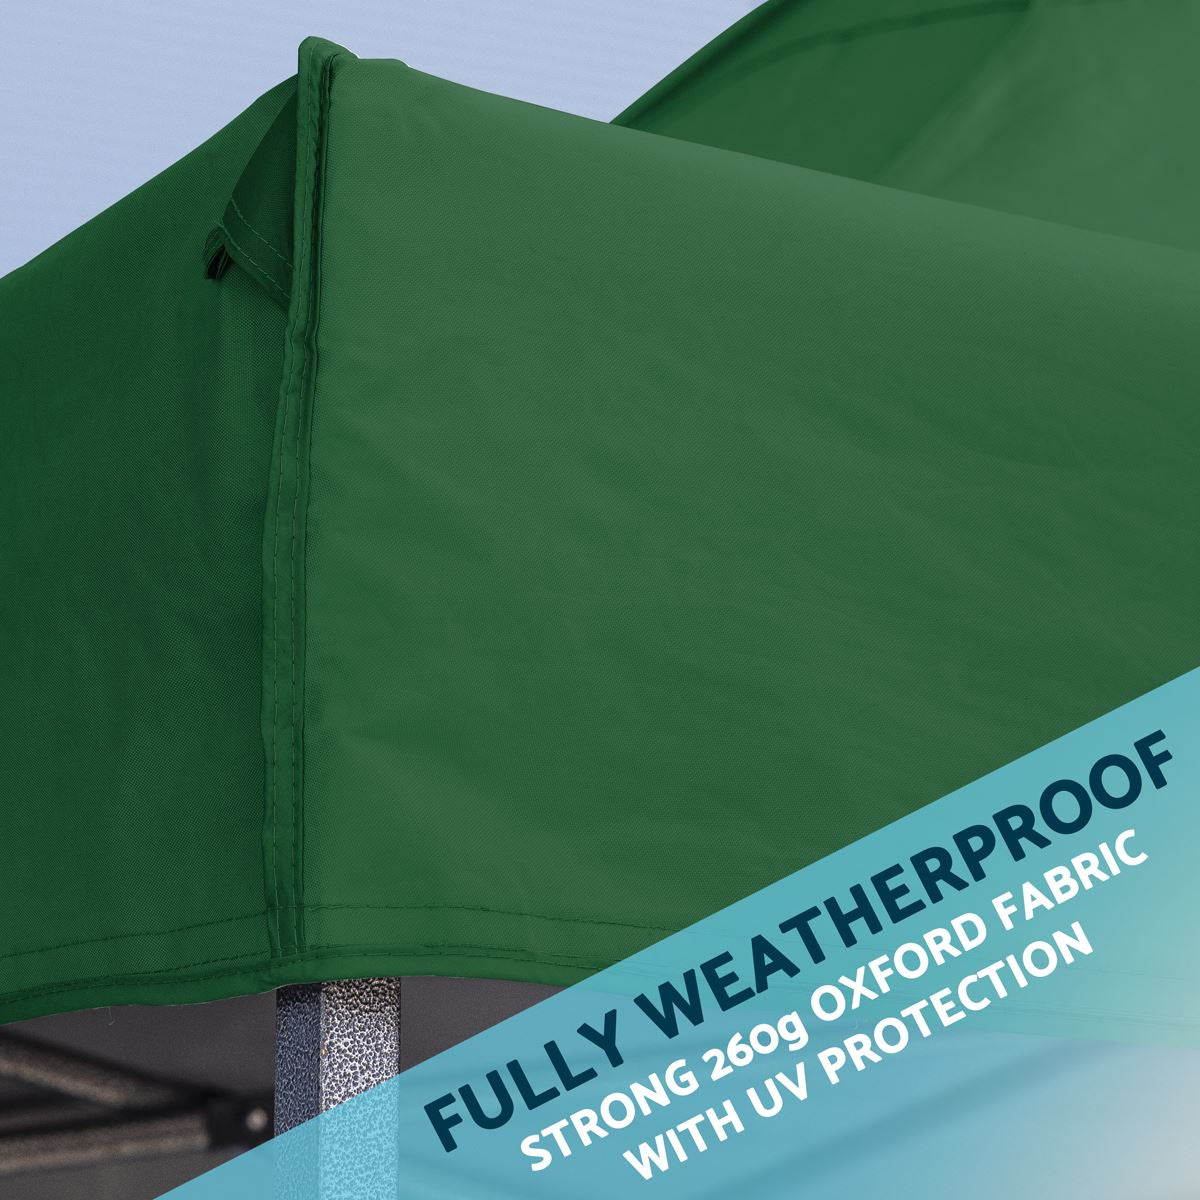 Dellonda Premium 3 x 4.5m Pop-Up Gazebo, Heavy Duty, PVC Coated, Water Resistant Fabric, Supplied with Carry Bag, Rope, Stakes & Weight Bags - Dark Green Canopy